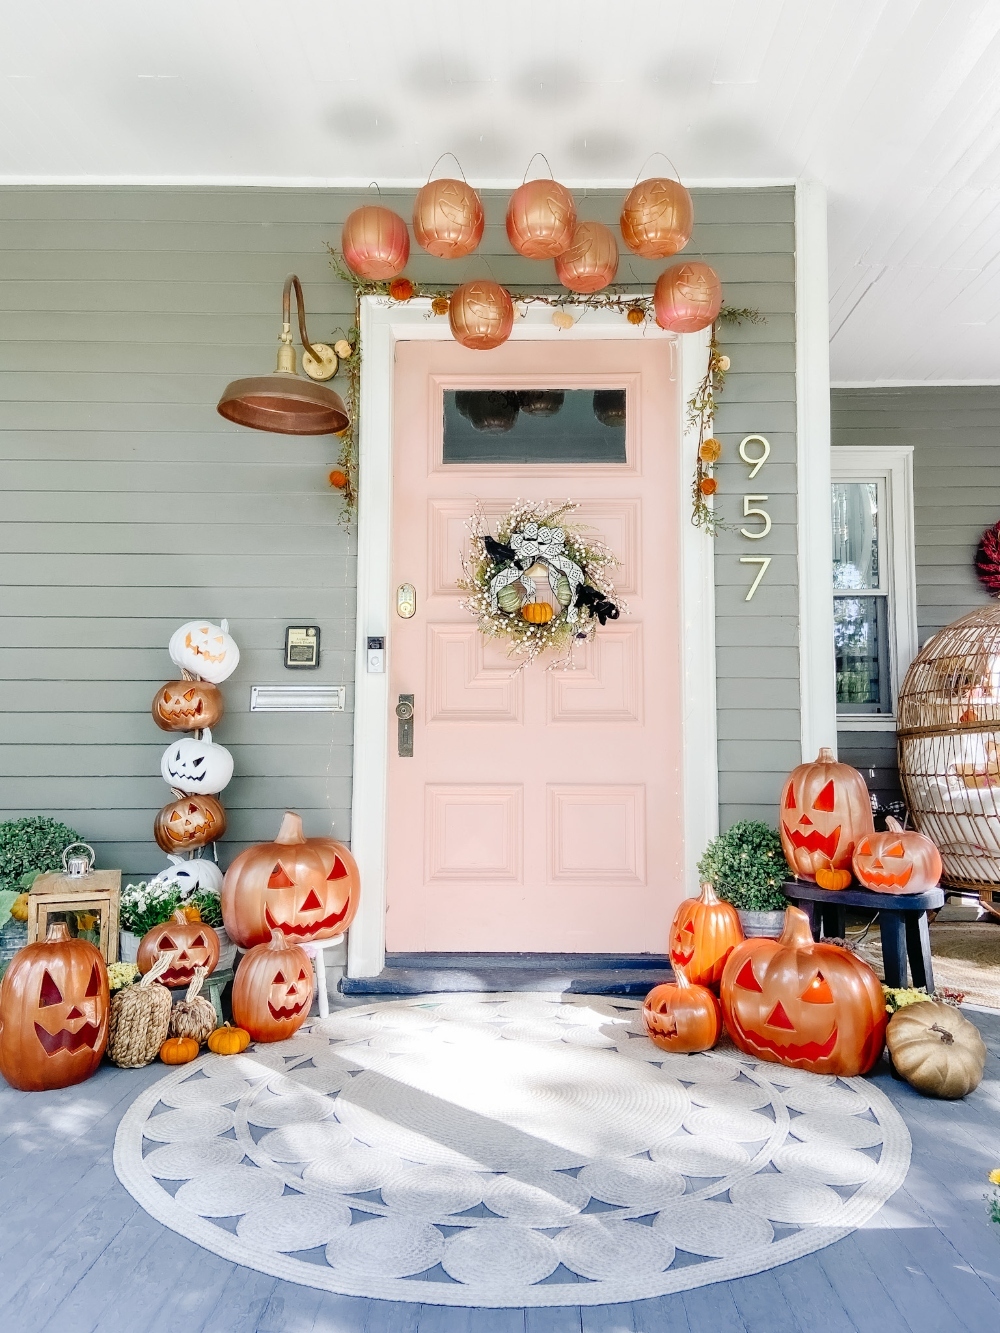 Light Up Pumpkin Farmhouse Wreath. Carve the middle of foam pumpkins, add light-up votives and add them to a wreath for a pretty wreath that also lights up at night! 